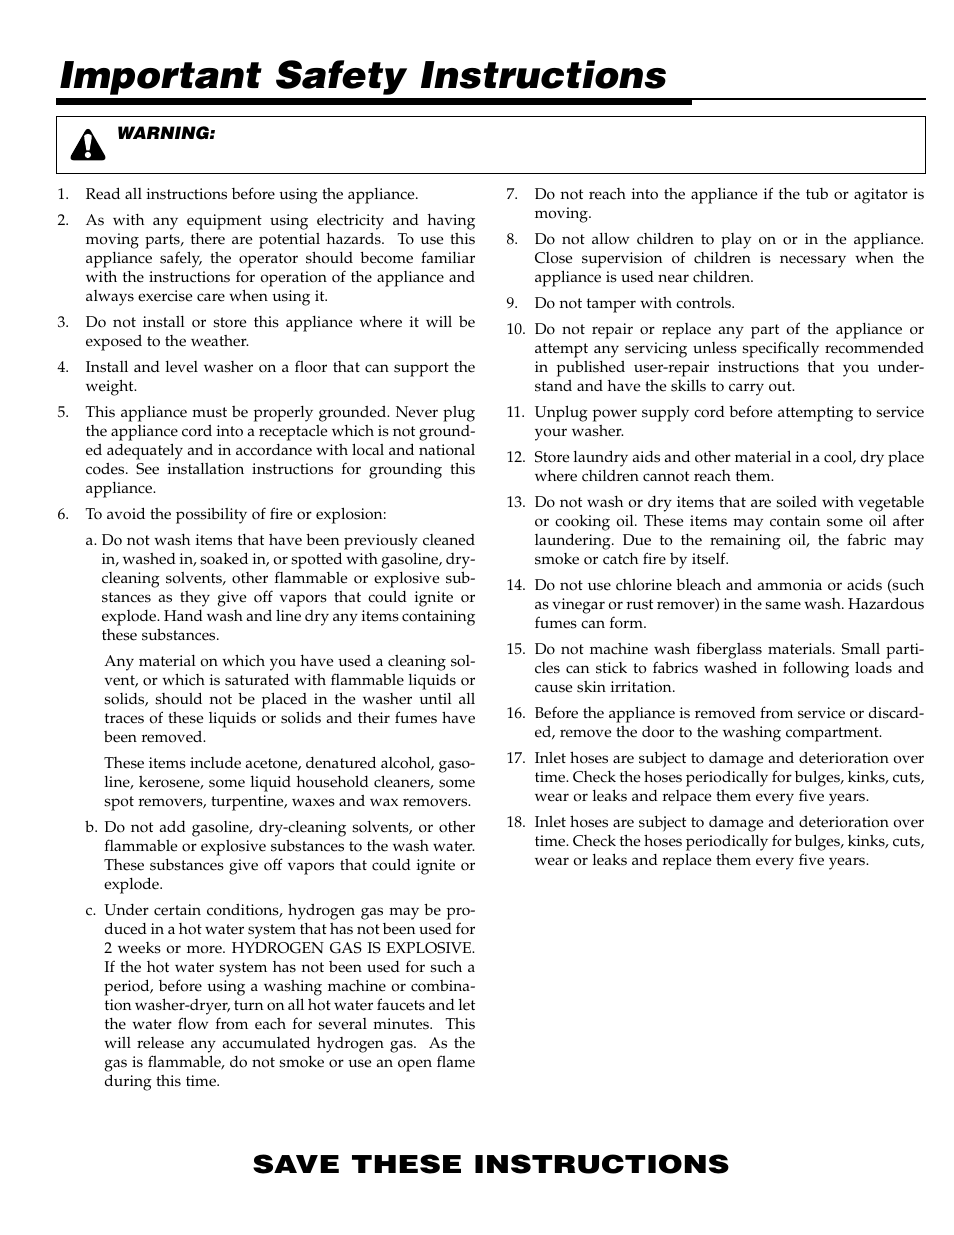 Important safety instructions, Save these instructions | Maytag LAT2500AAE User Manual | Page 2 / 28